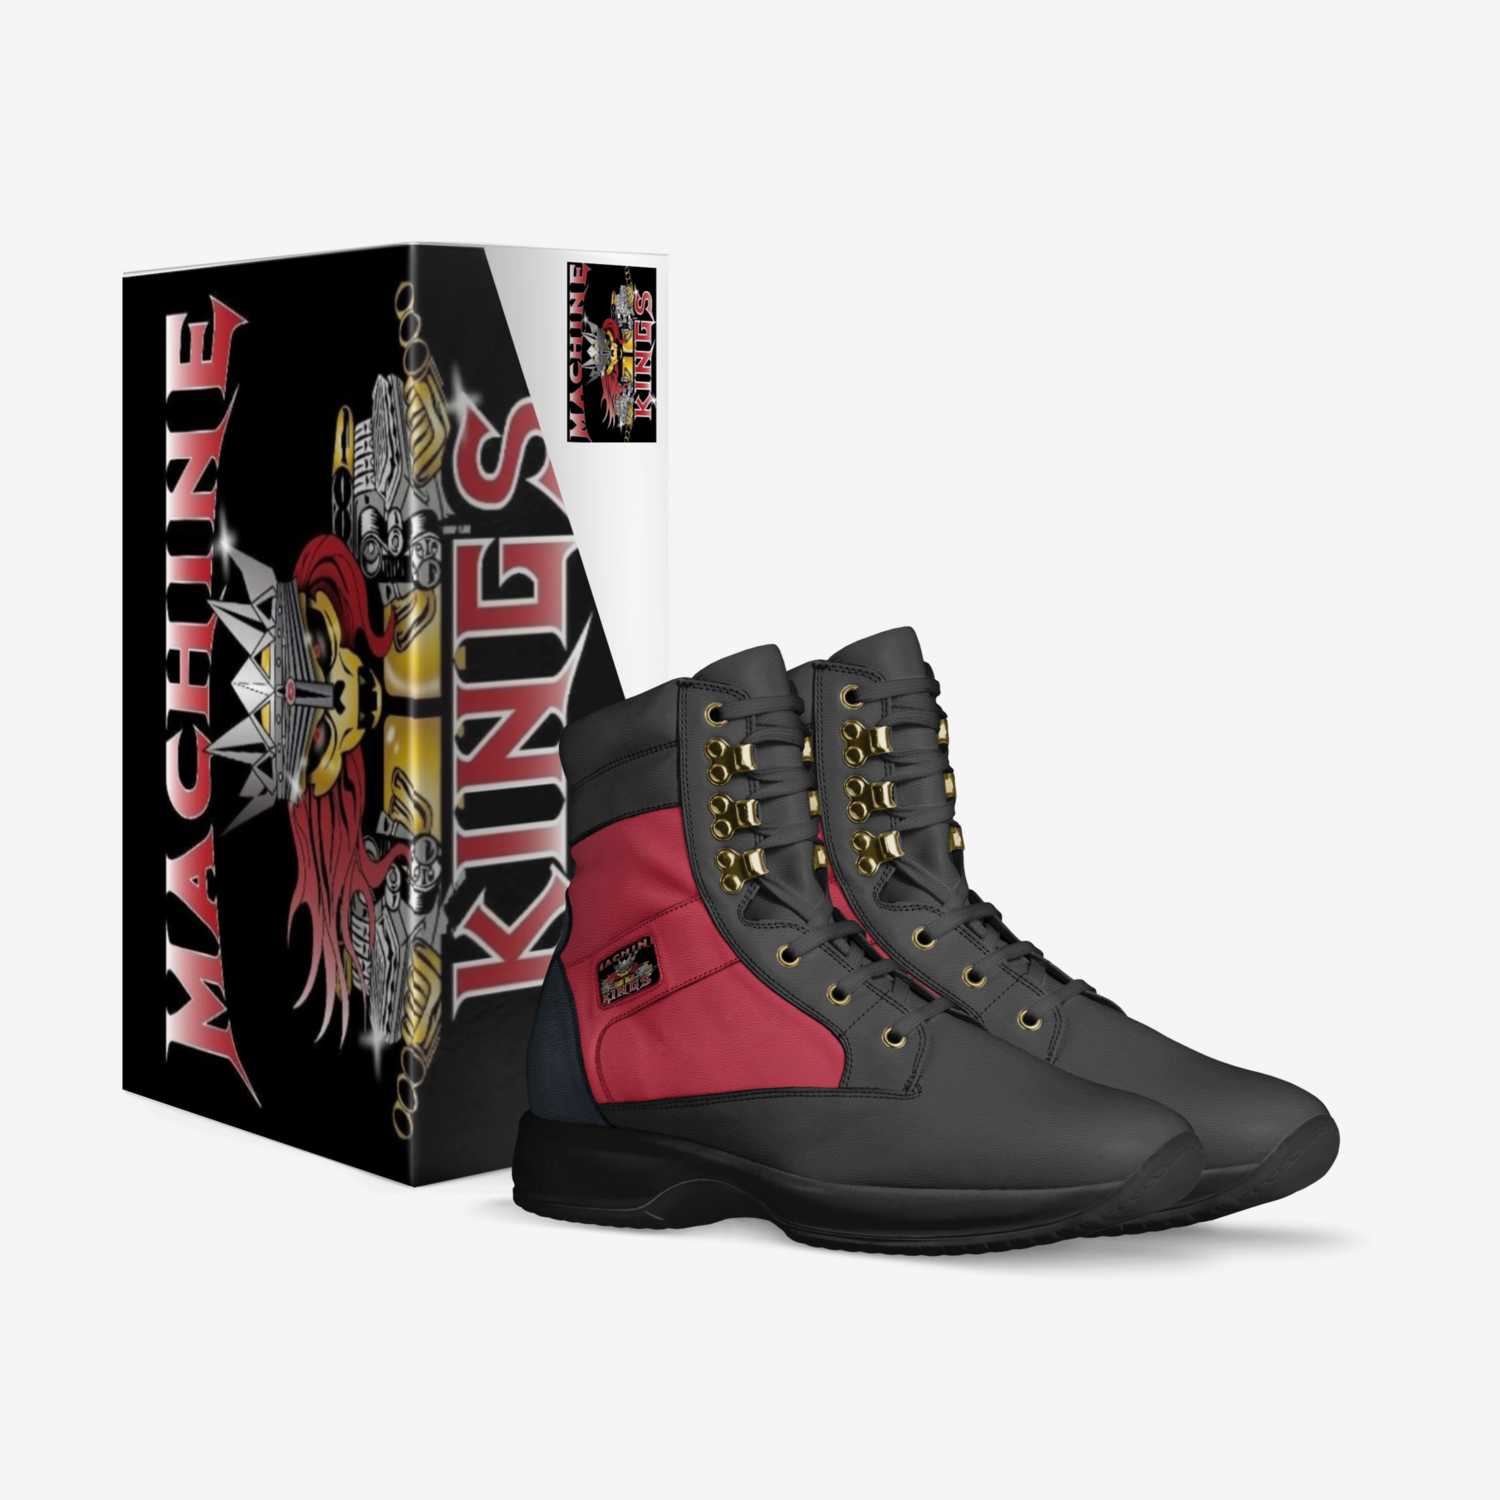 MACHINE KINGS custom made in Italy shoes by Sj Mays | Box view